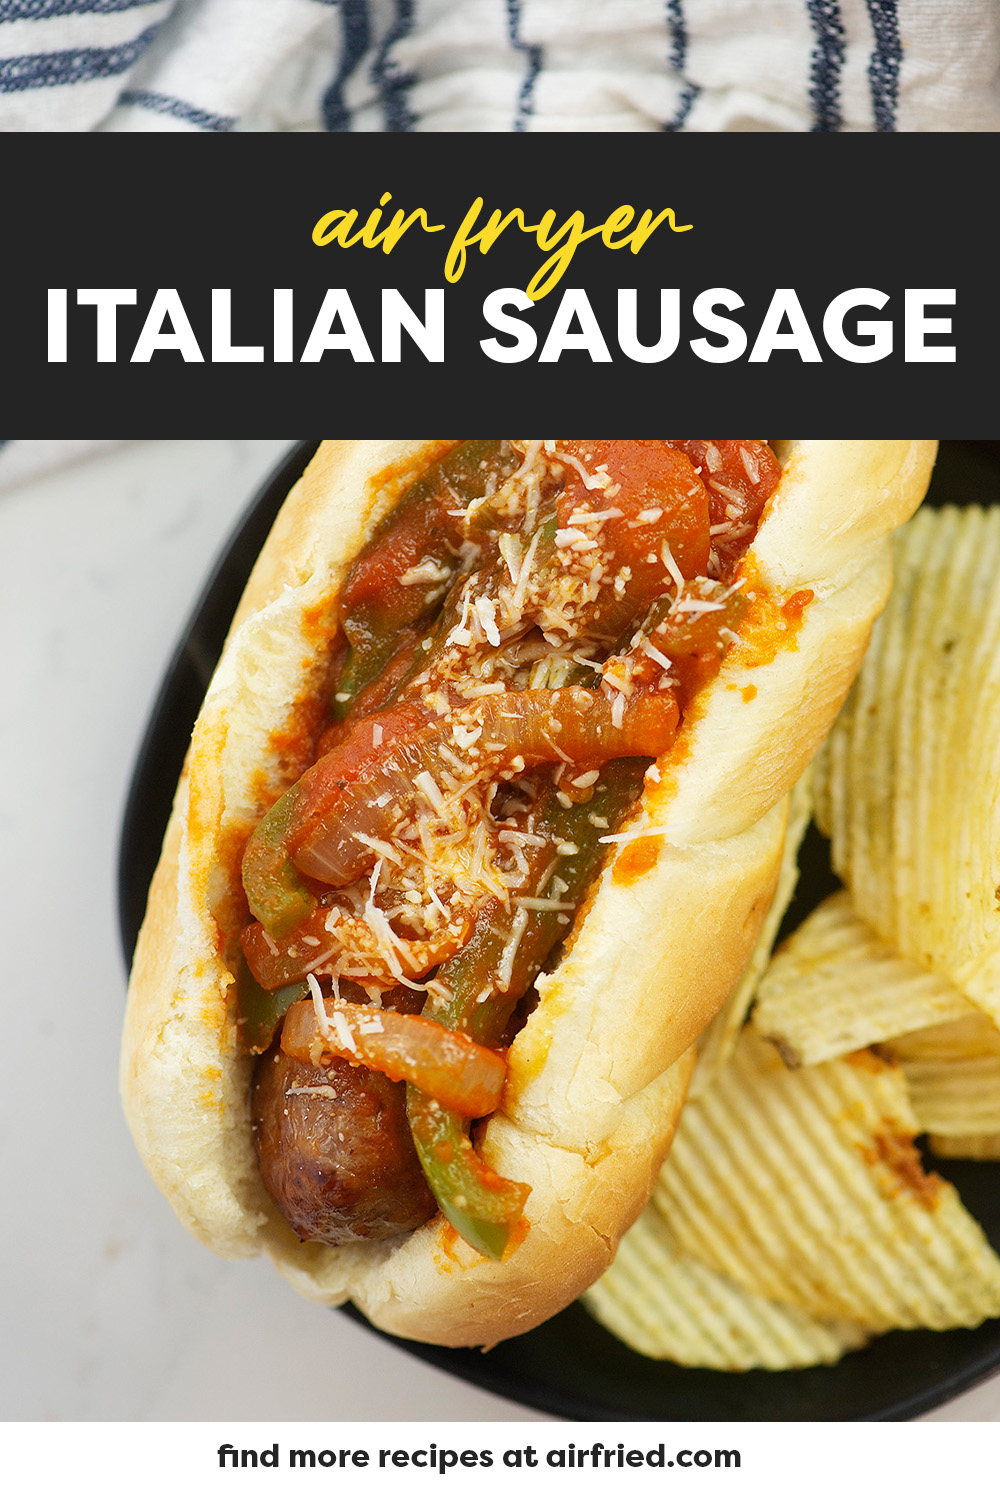 We use our air fryer to cook up this yummy Italian sausage. It is perfectly cooked with a consistent texture throughout and we top it with marinara for excellent flavor!